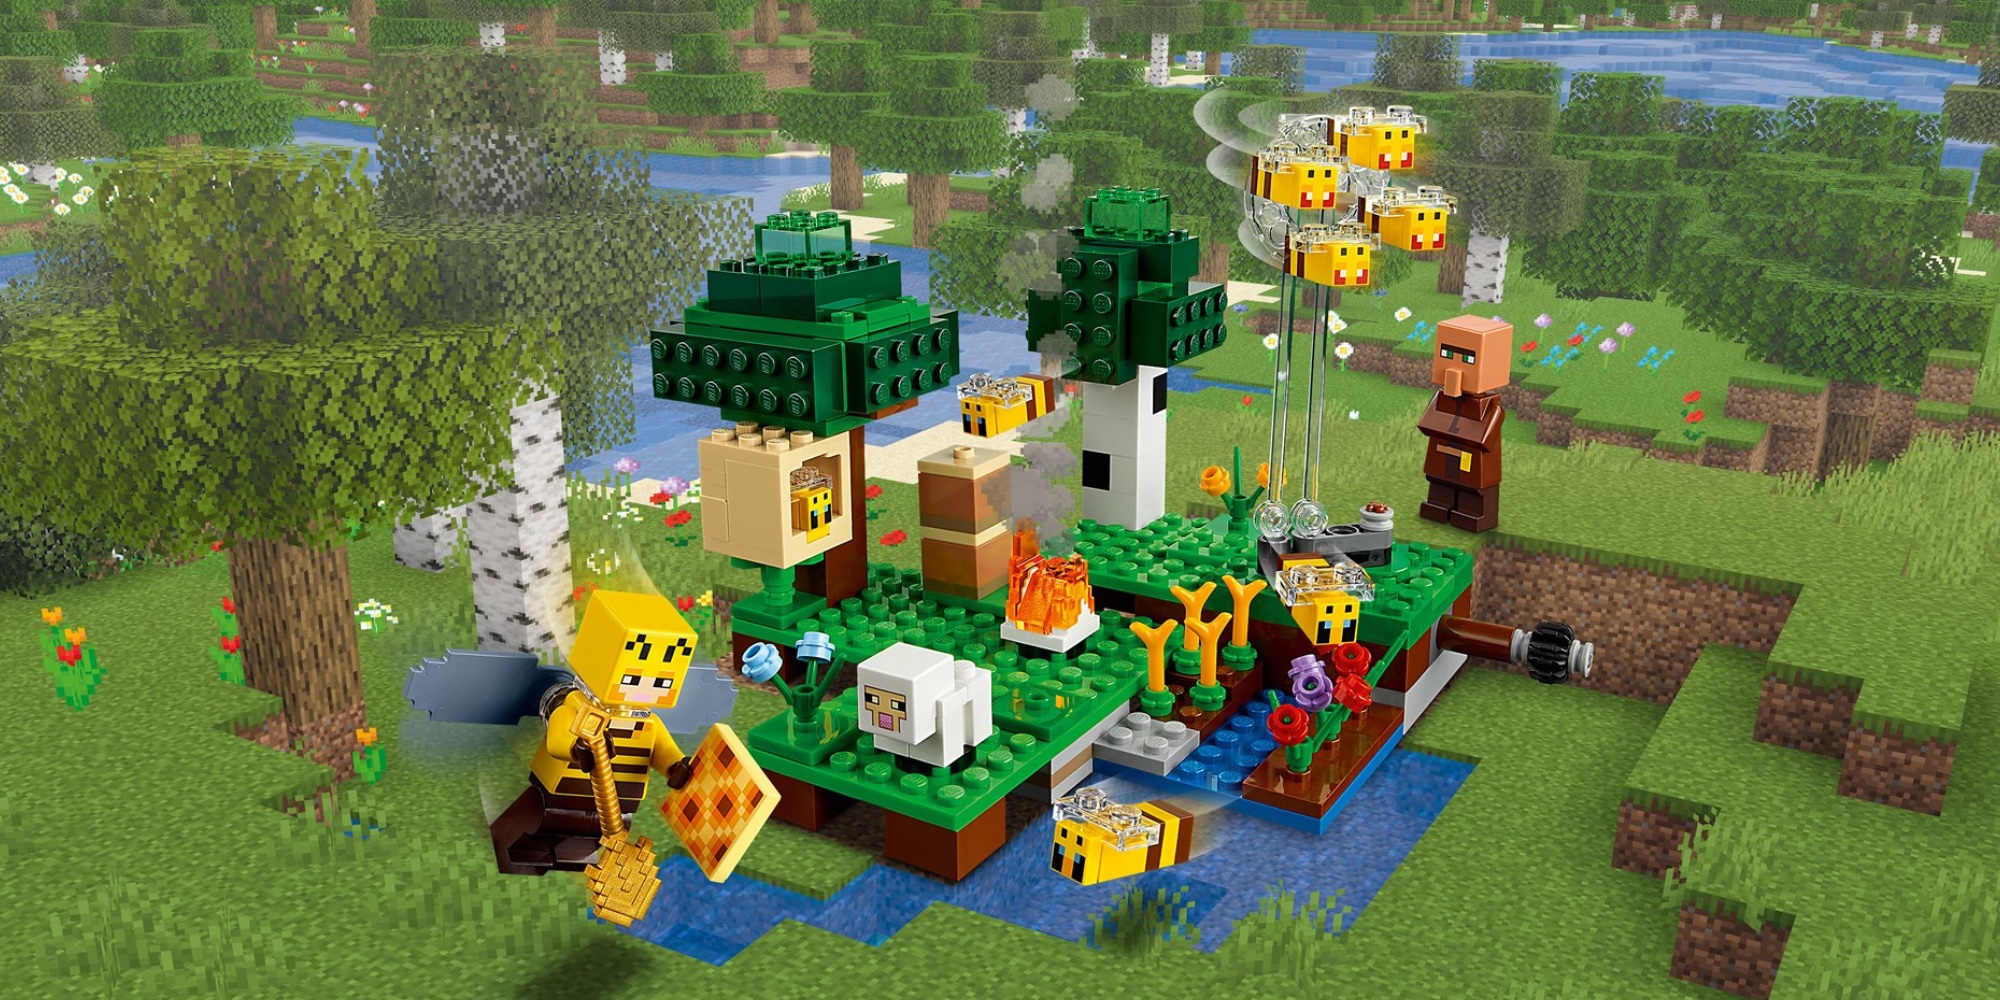 Lego Minecraft Bee Farm Announced Alongside Another New Kit 9to5toys